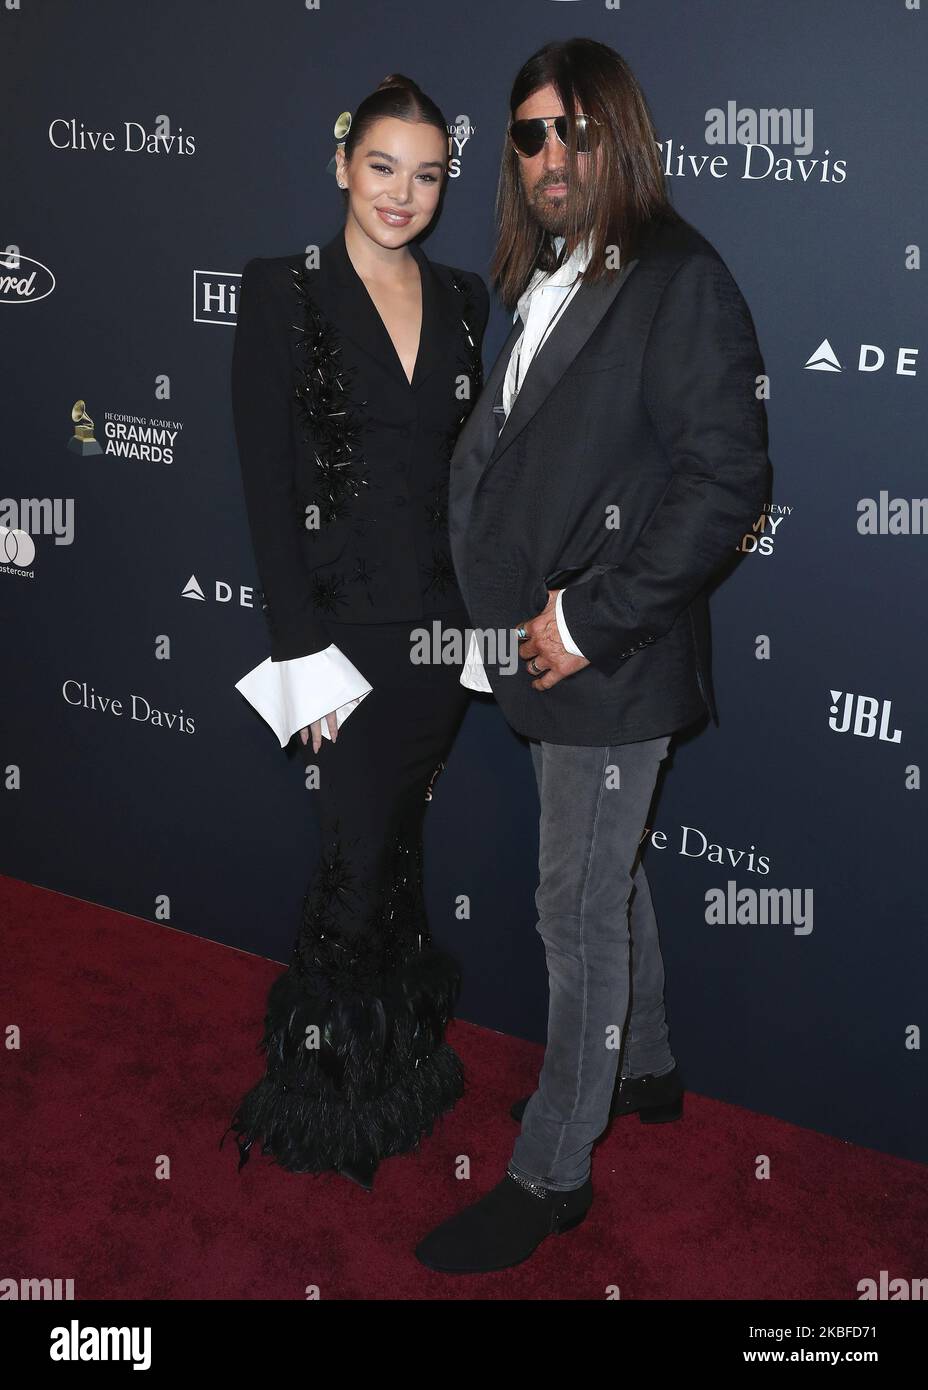 BEVERLY HILLS, LOS ANGELES, CALIFORNIA, USA - JANUARY 25: Hailee Steinfeld and Billy Ray Cyrus arrive at The Recording Academy And Clive Davis' 2020 Pre-GRAMMY Gala held at The Beverly Hilton Hotel on January 25, 2020 in Beverly Hills, Los Angeles, California, United States. (Photo by Xavier Collin/Image Press Agency/NurPhoto) Stock Photo